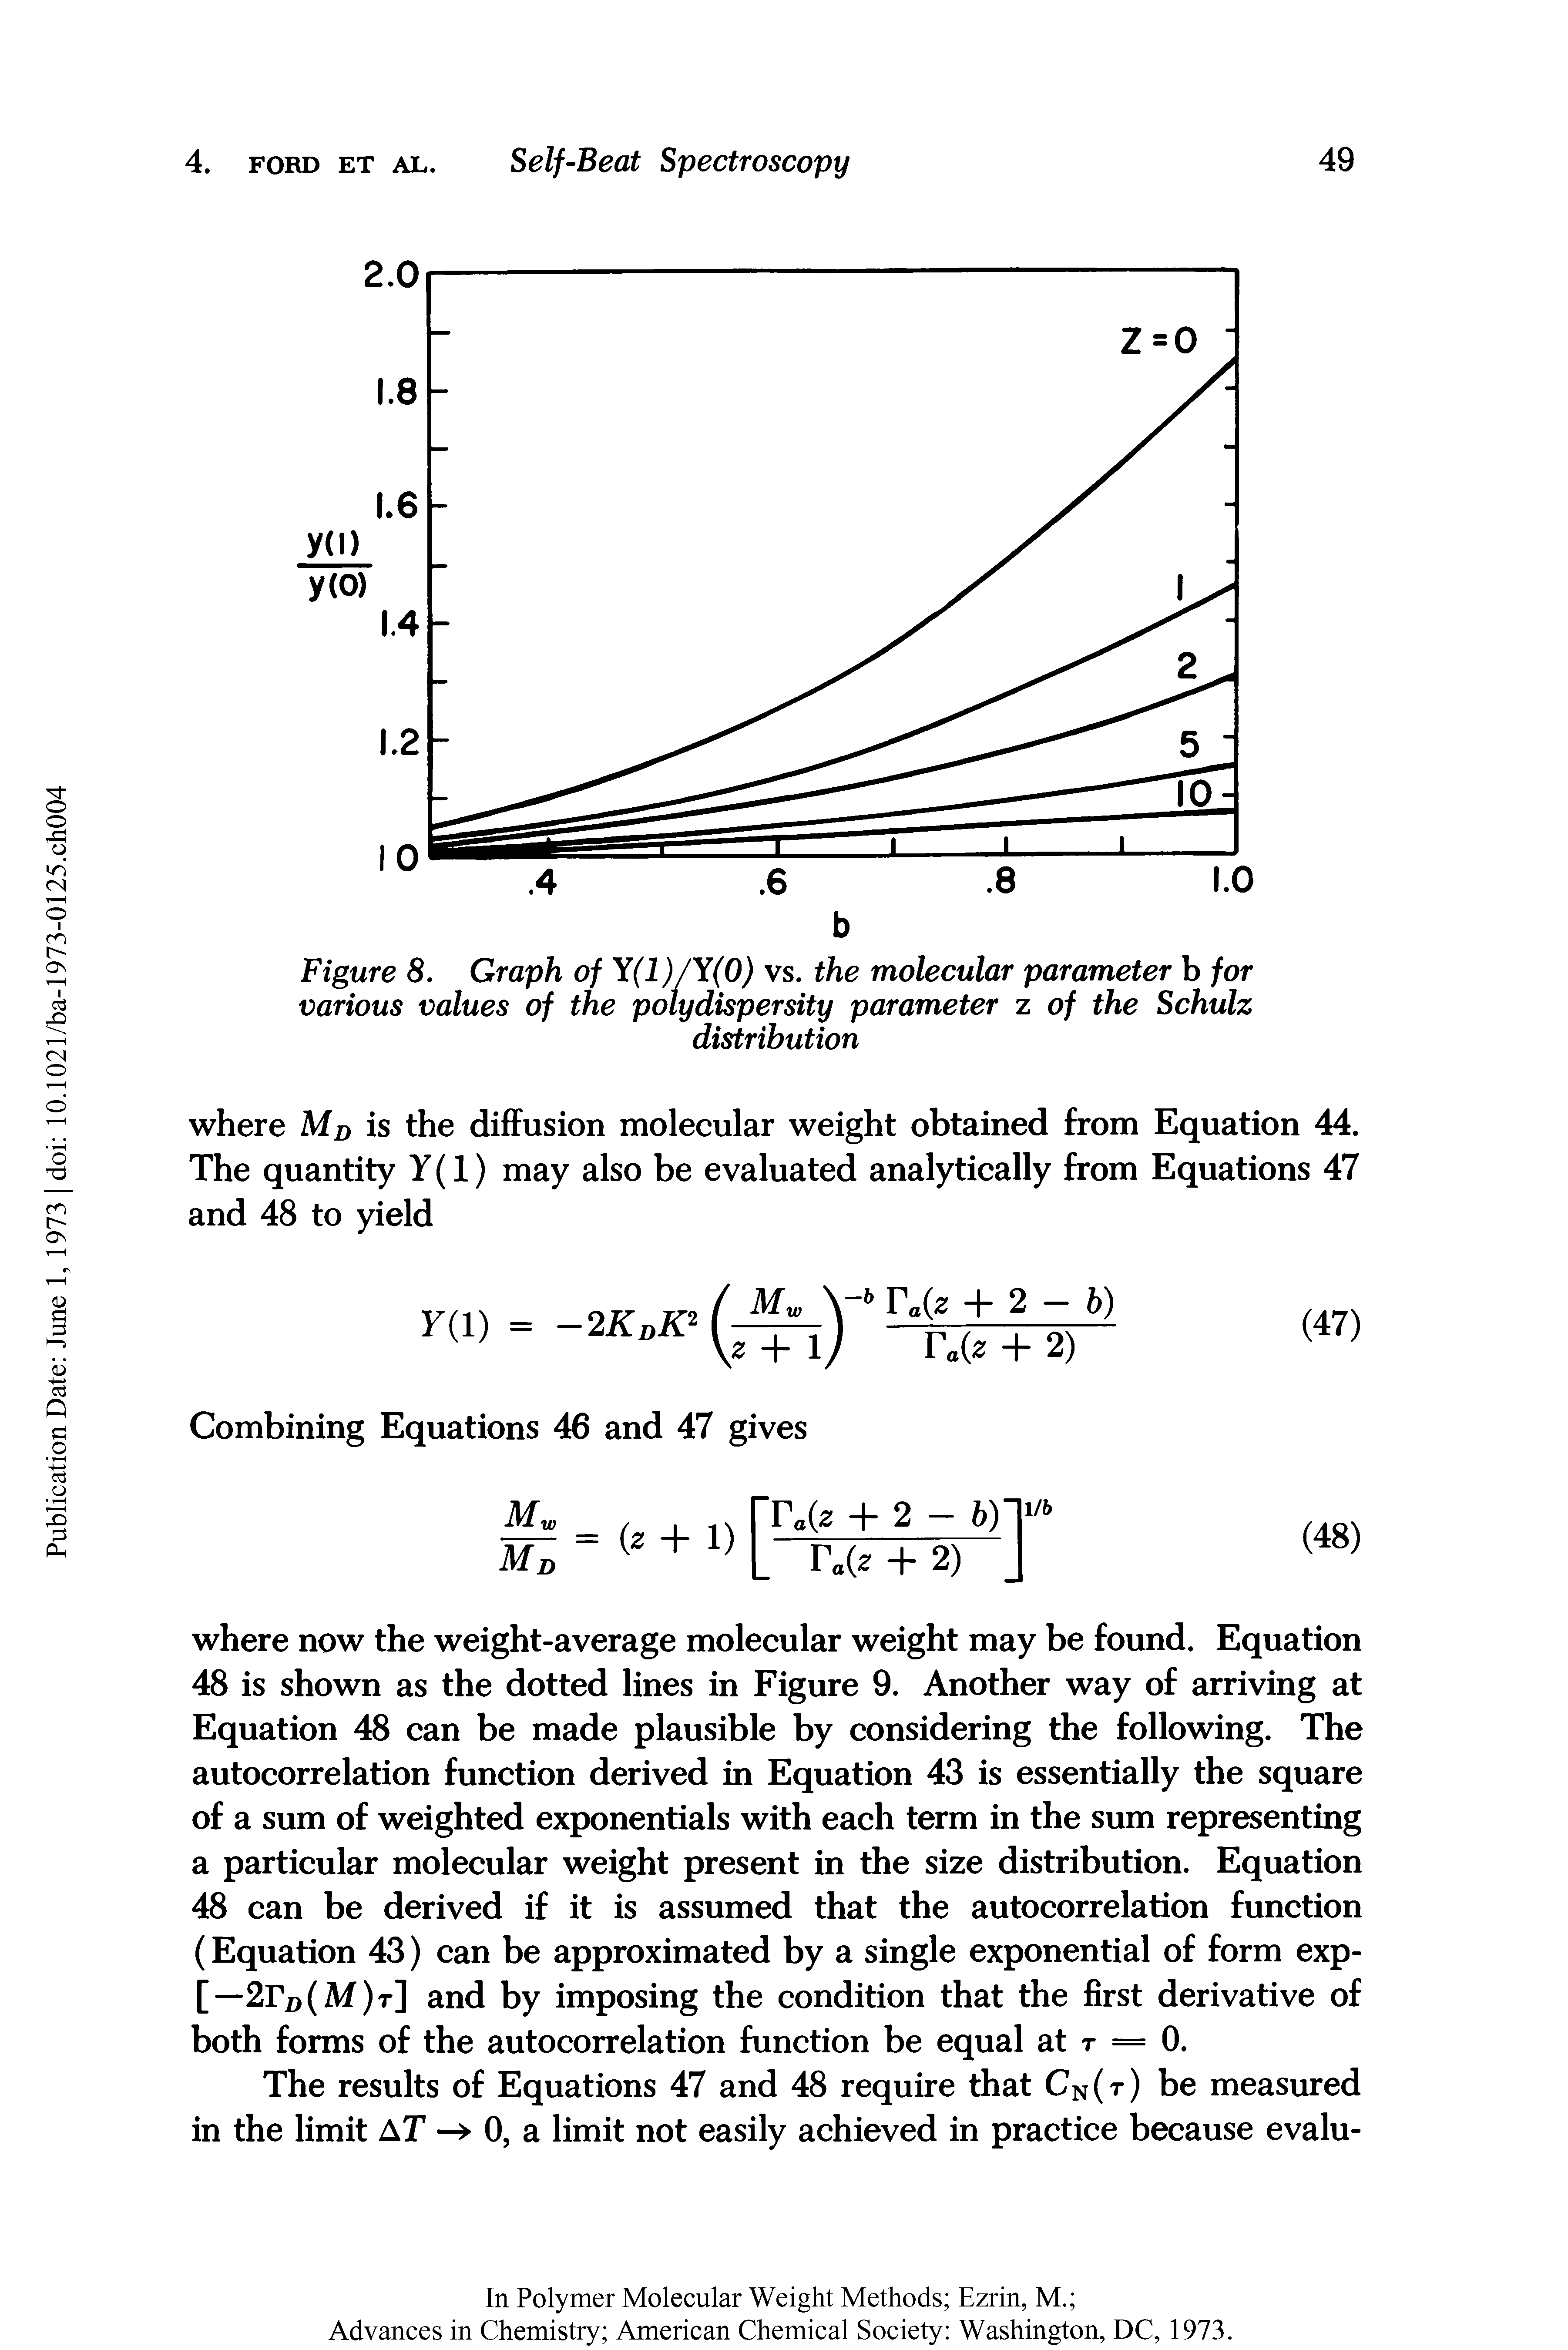 Figure 8. Graph of Y(1)/Y(0) vs. the molecular parameter b for various values of the polydispersity parameter z of the Schulz...